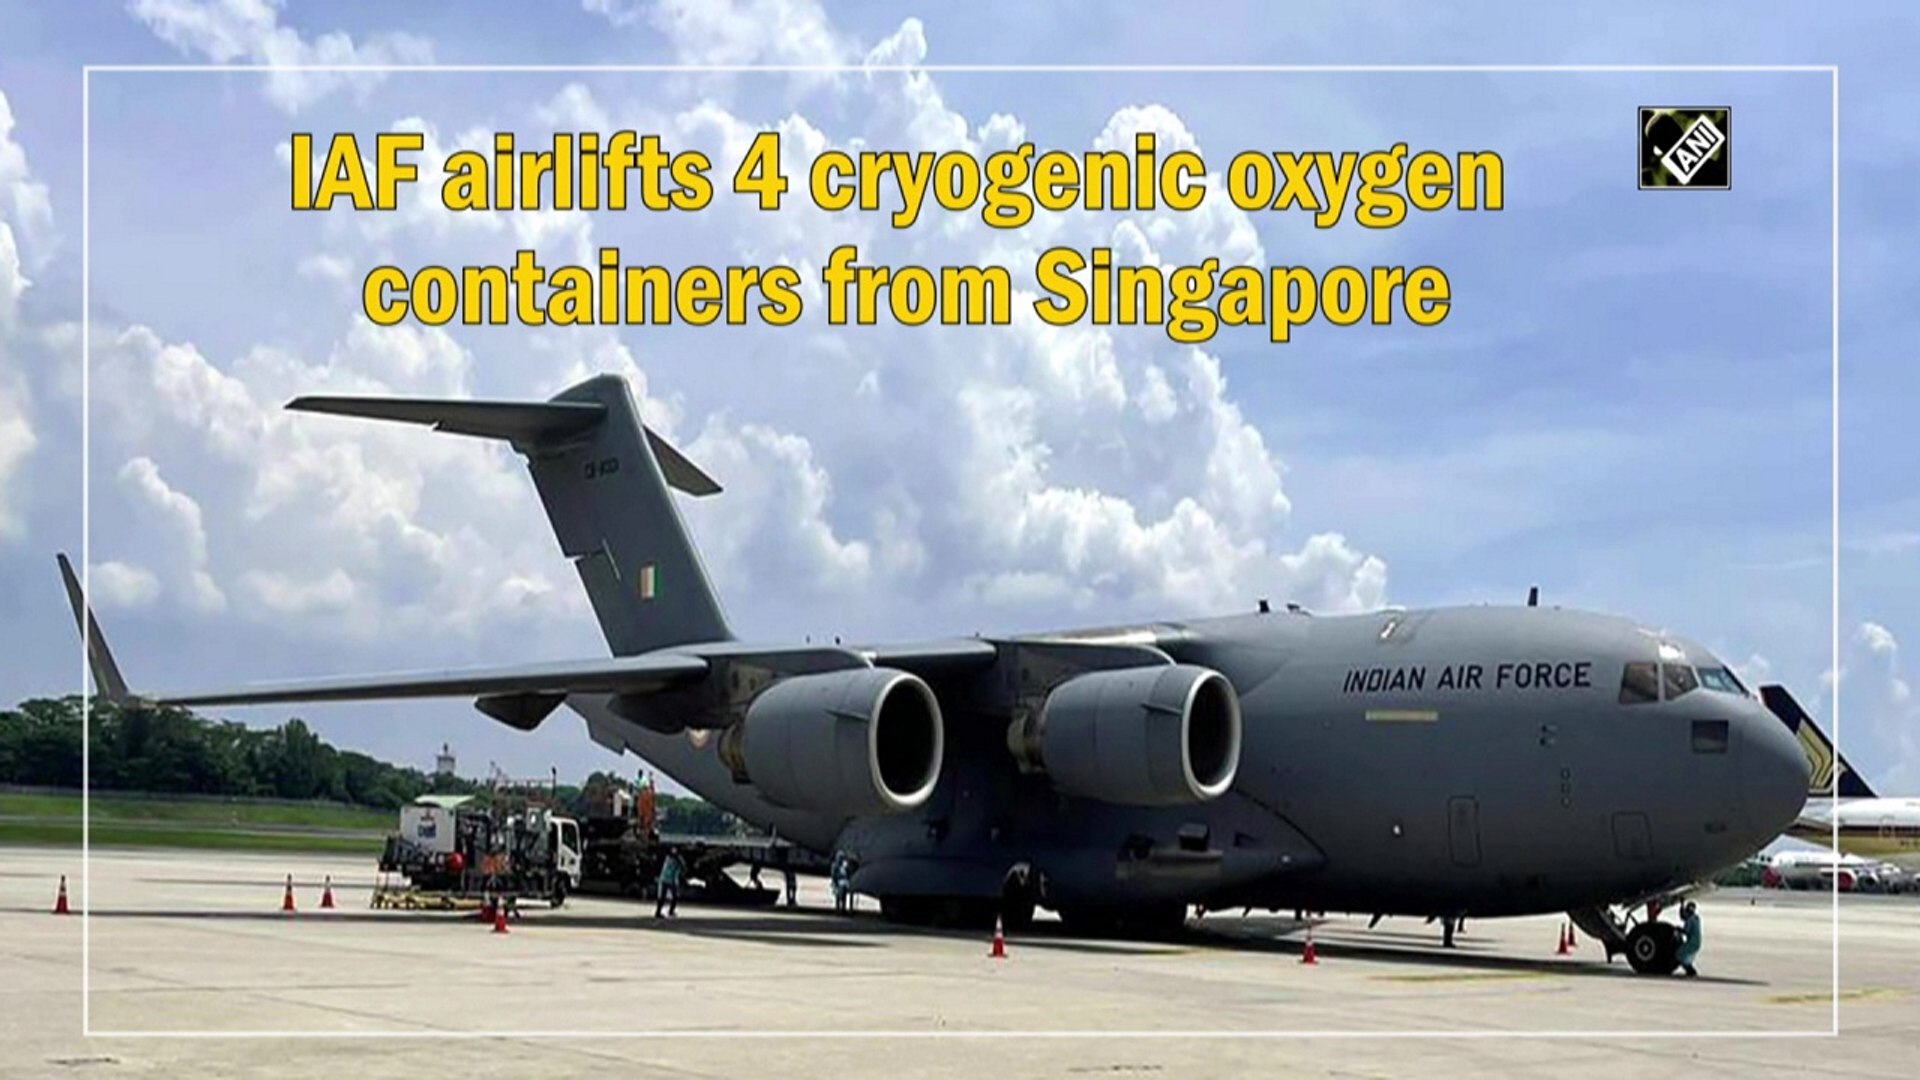 IAF airlifts 4 cryogenic oxygen containers from Singapore